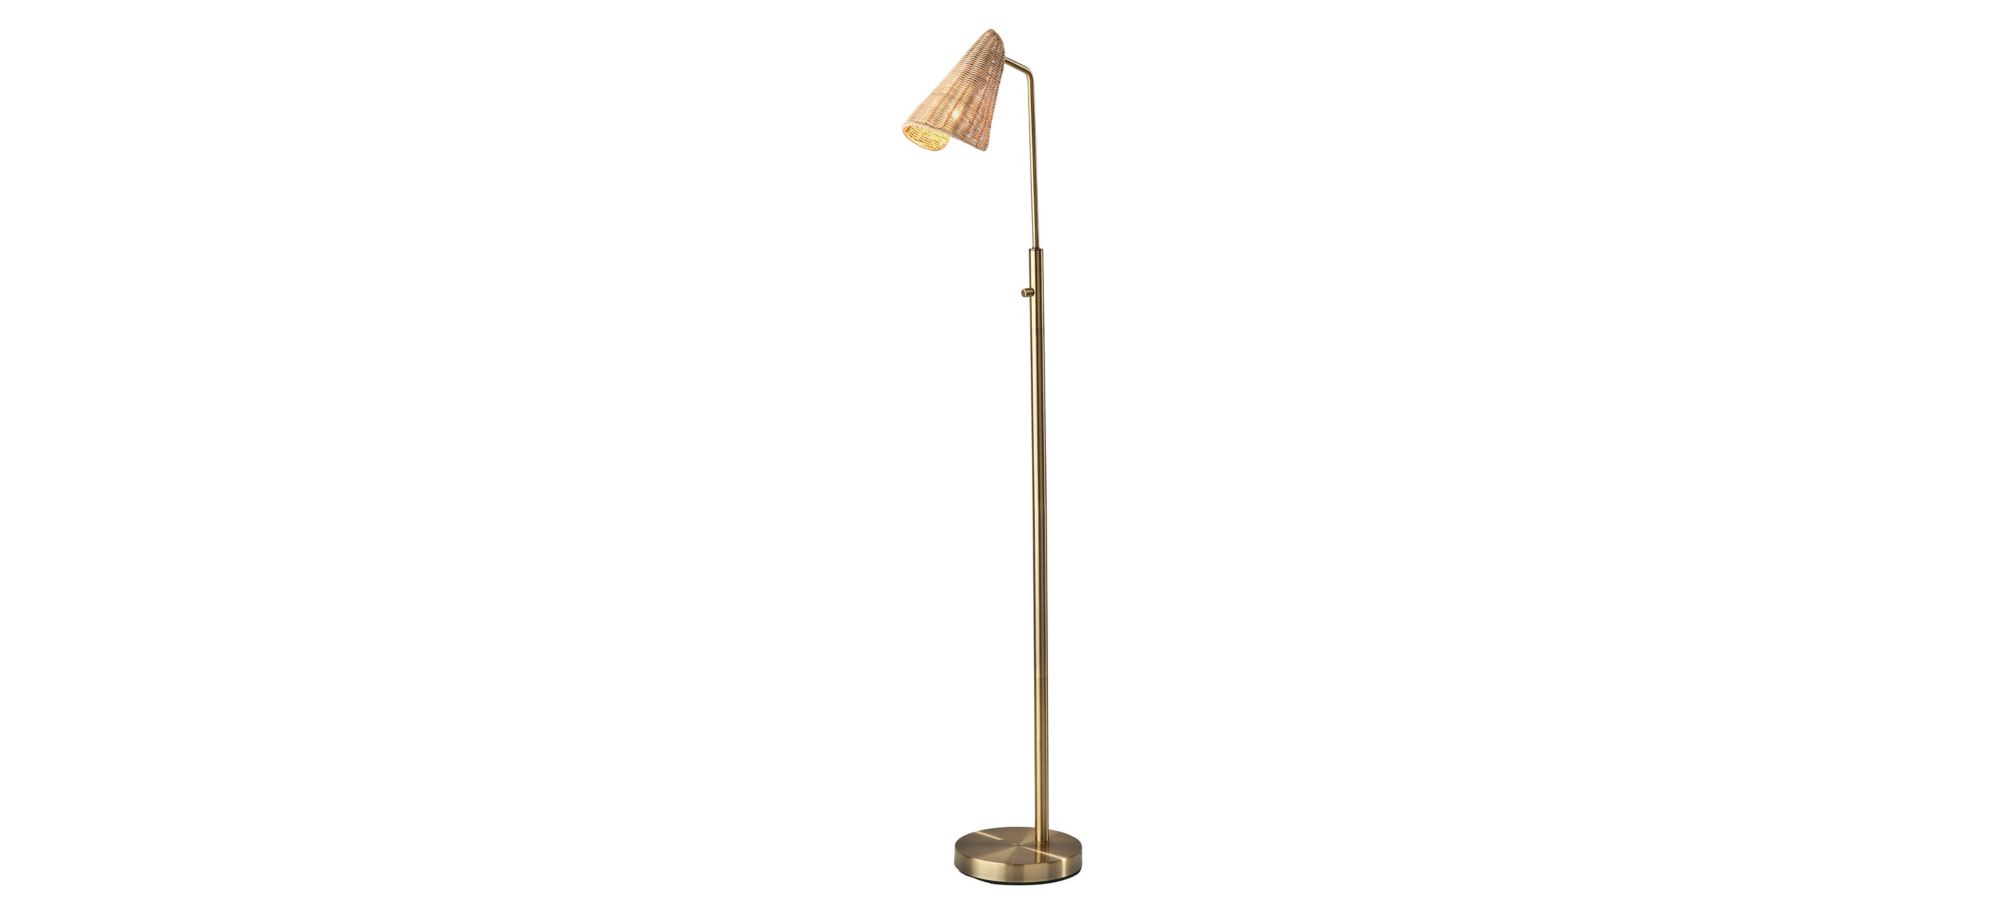 Cove Floor Lamp in Antique Brass by Adesso Inc